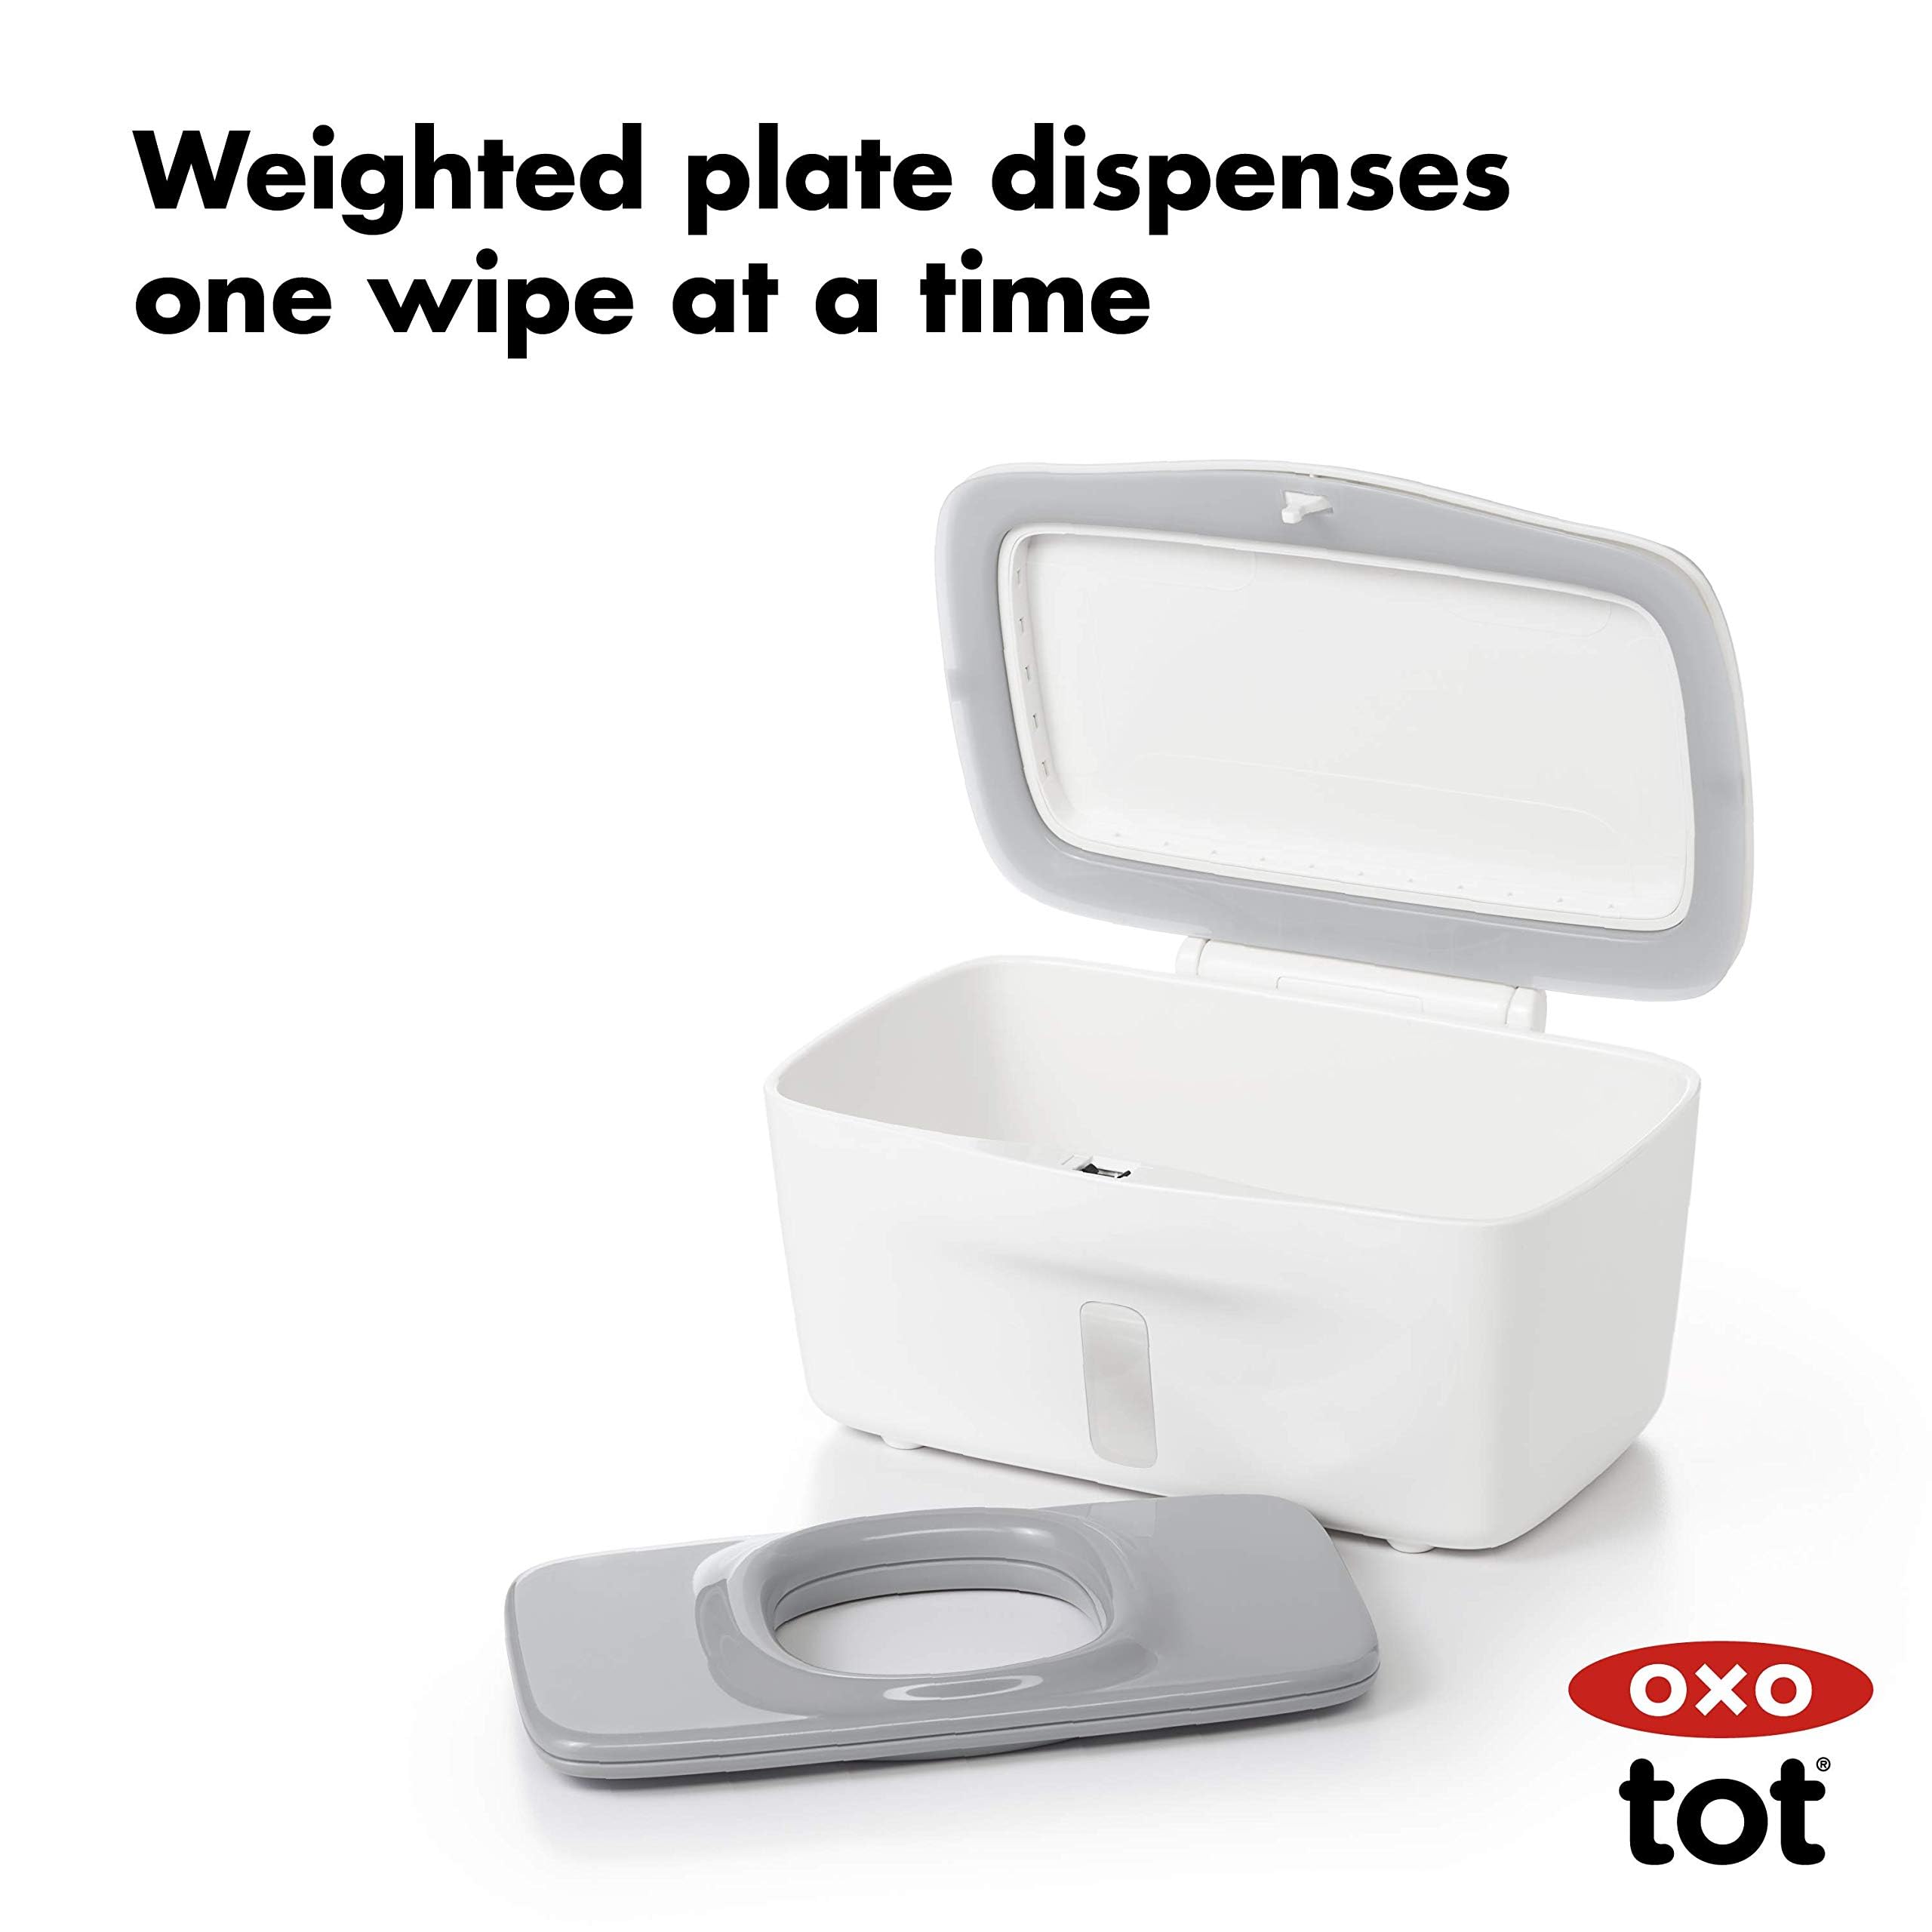 OXO Tot Perfect Pull Wipes Dispenser - gray, 1 count (Pack of 1)